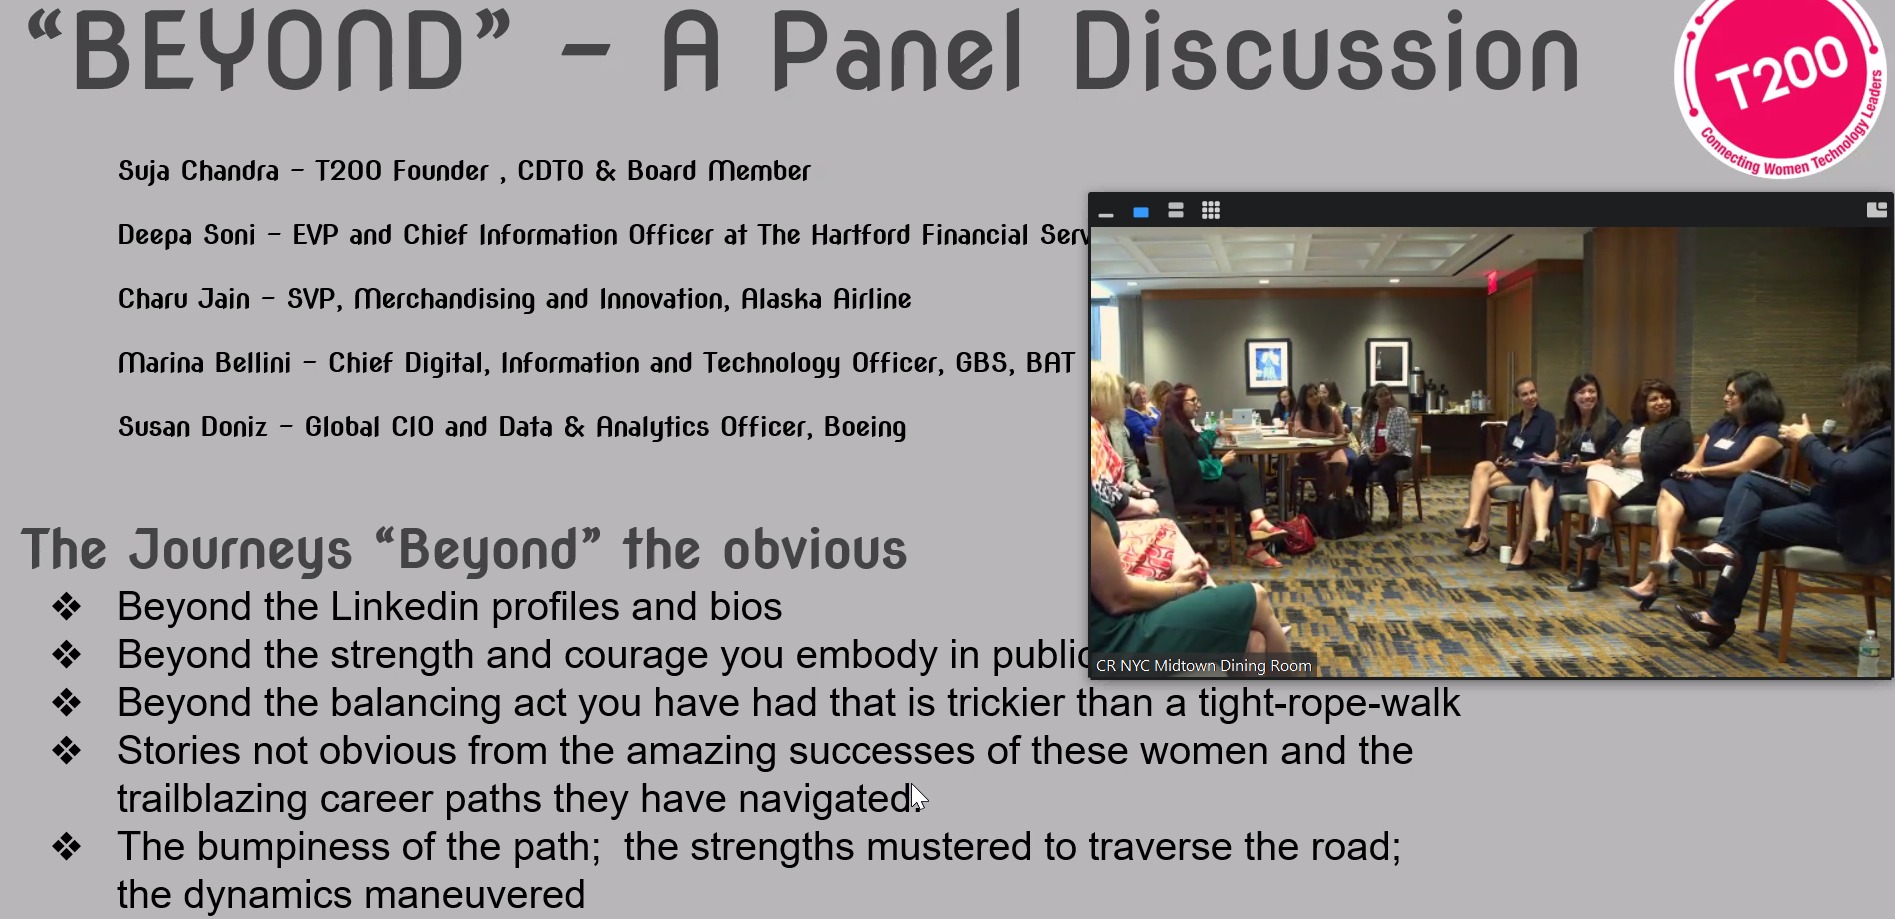 Beyond - A Panel Discussion text